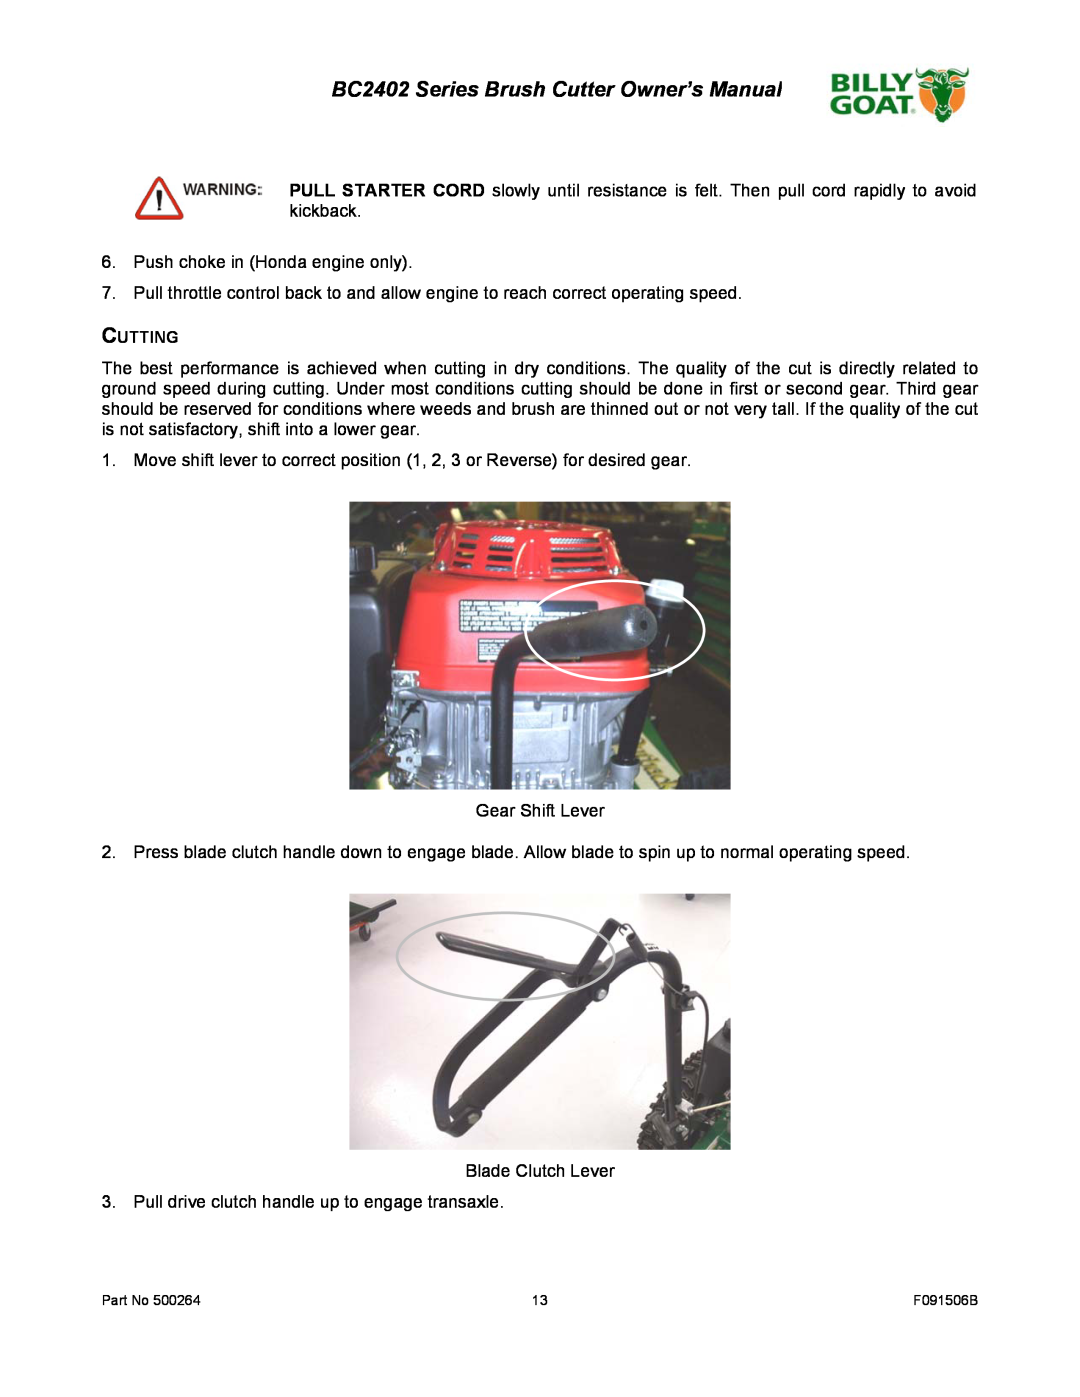 Billy Goat BC2402 owner manual Cutting 